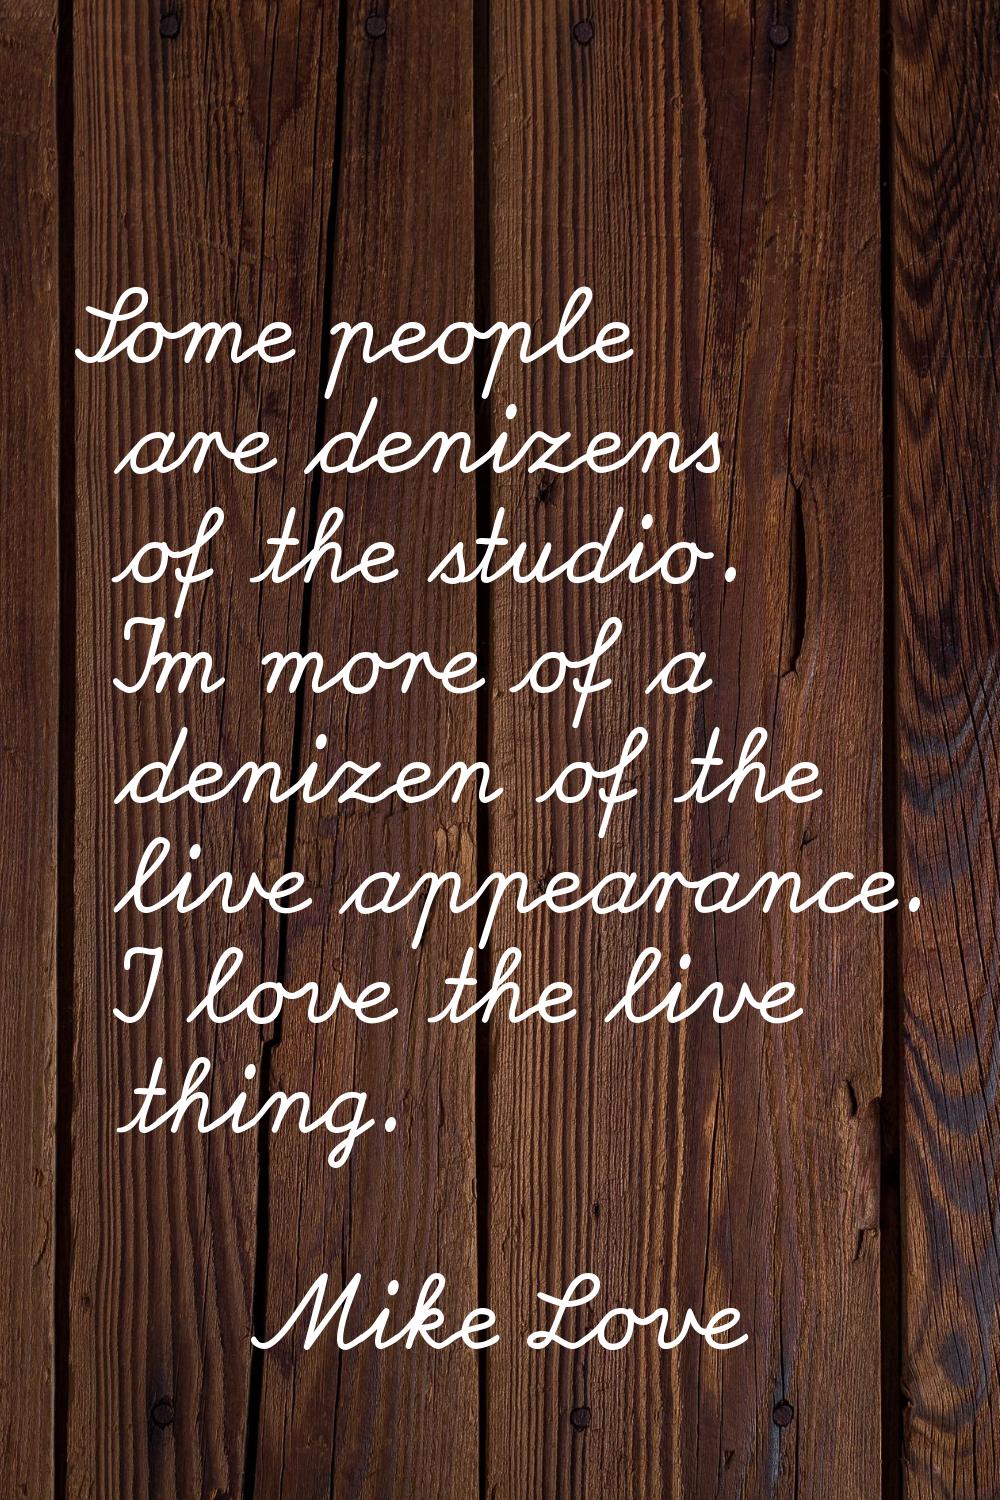 Some people are denizens of the studio. I'm more of a denizen of the live appearance. I love the li